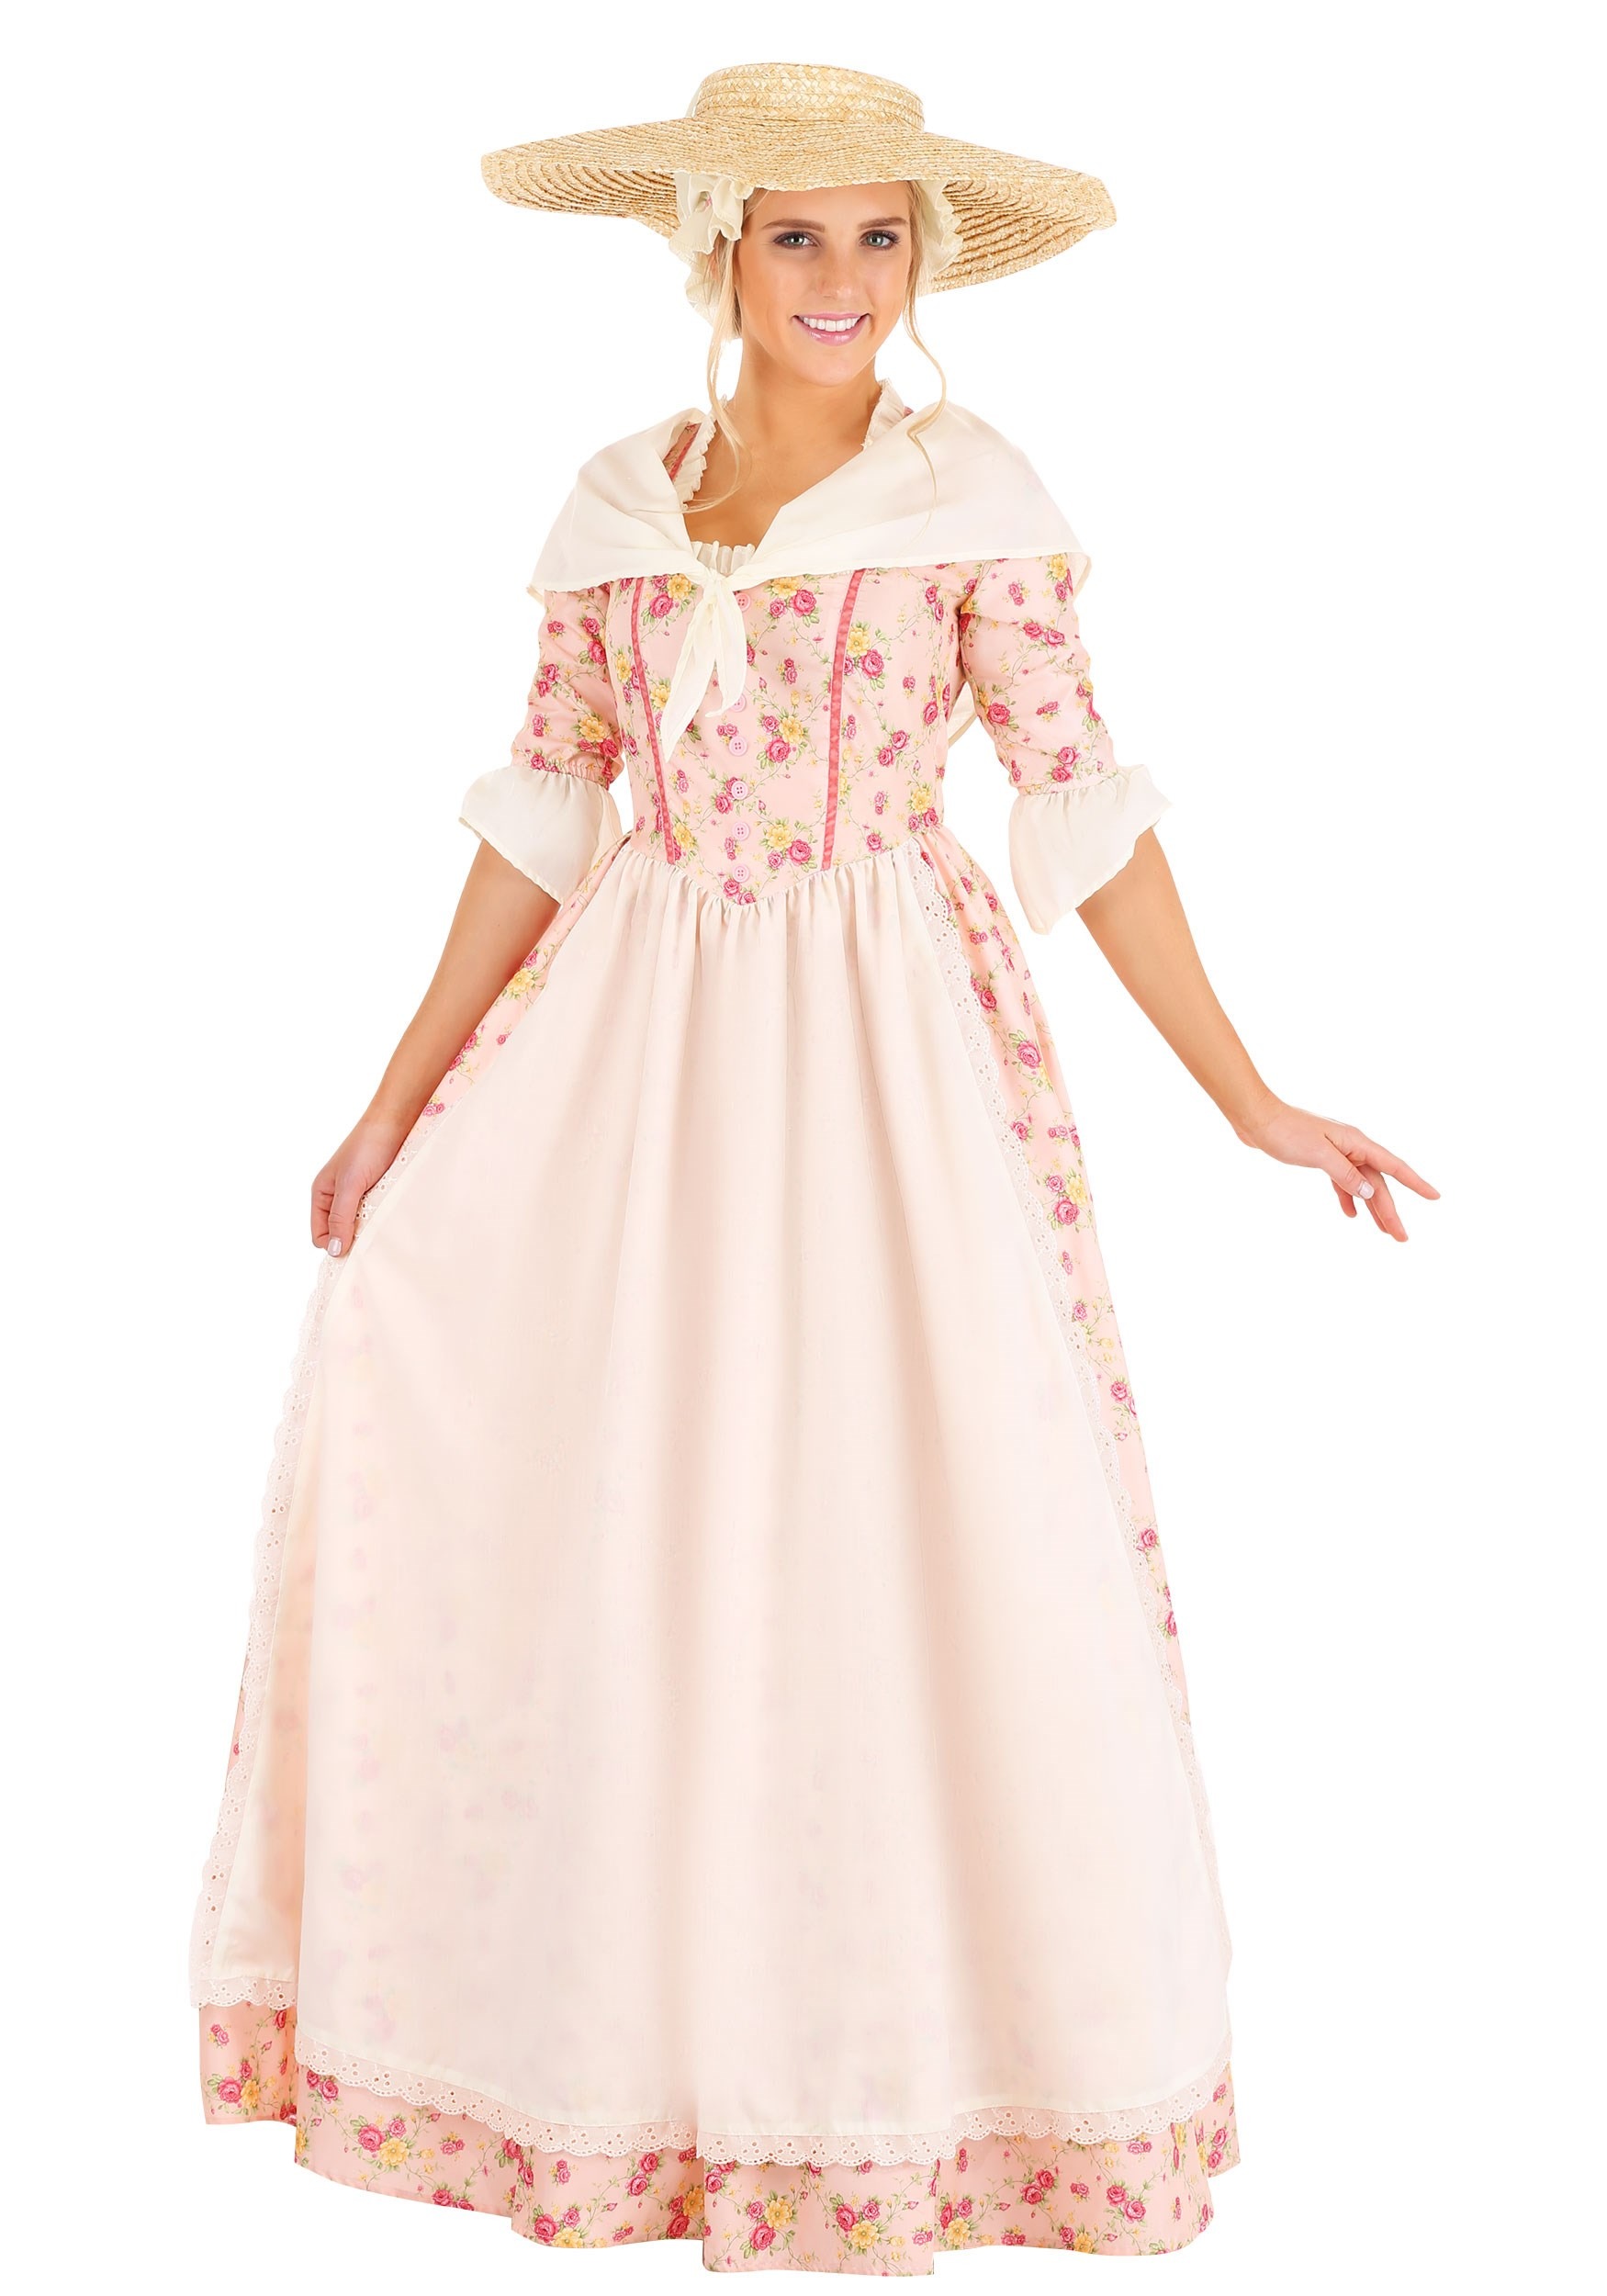 Amelia Colonial Dress and Bonnet Costume in Girls Sizes 1-10